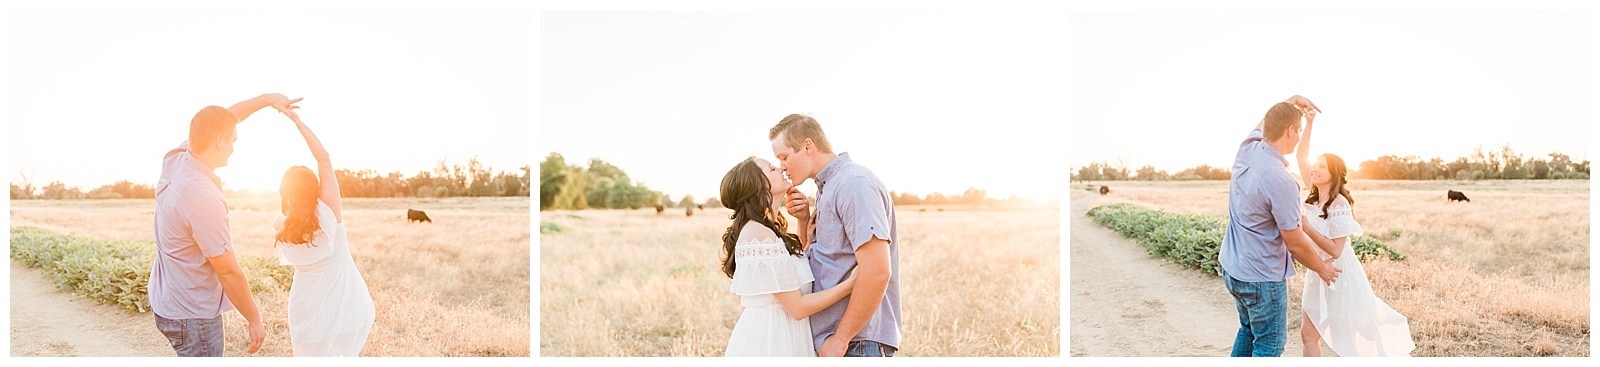 rustic country engagement session couple dancing in the middle of a cattle grazing pasture in Visalia california